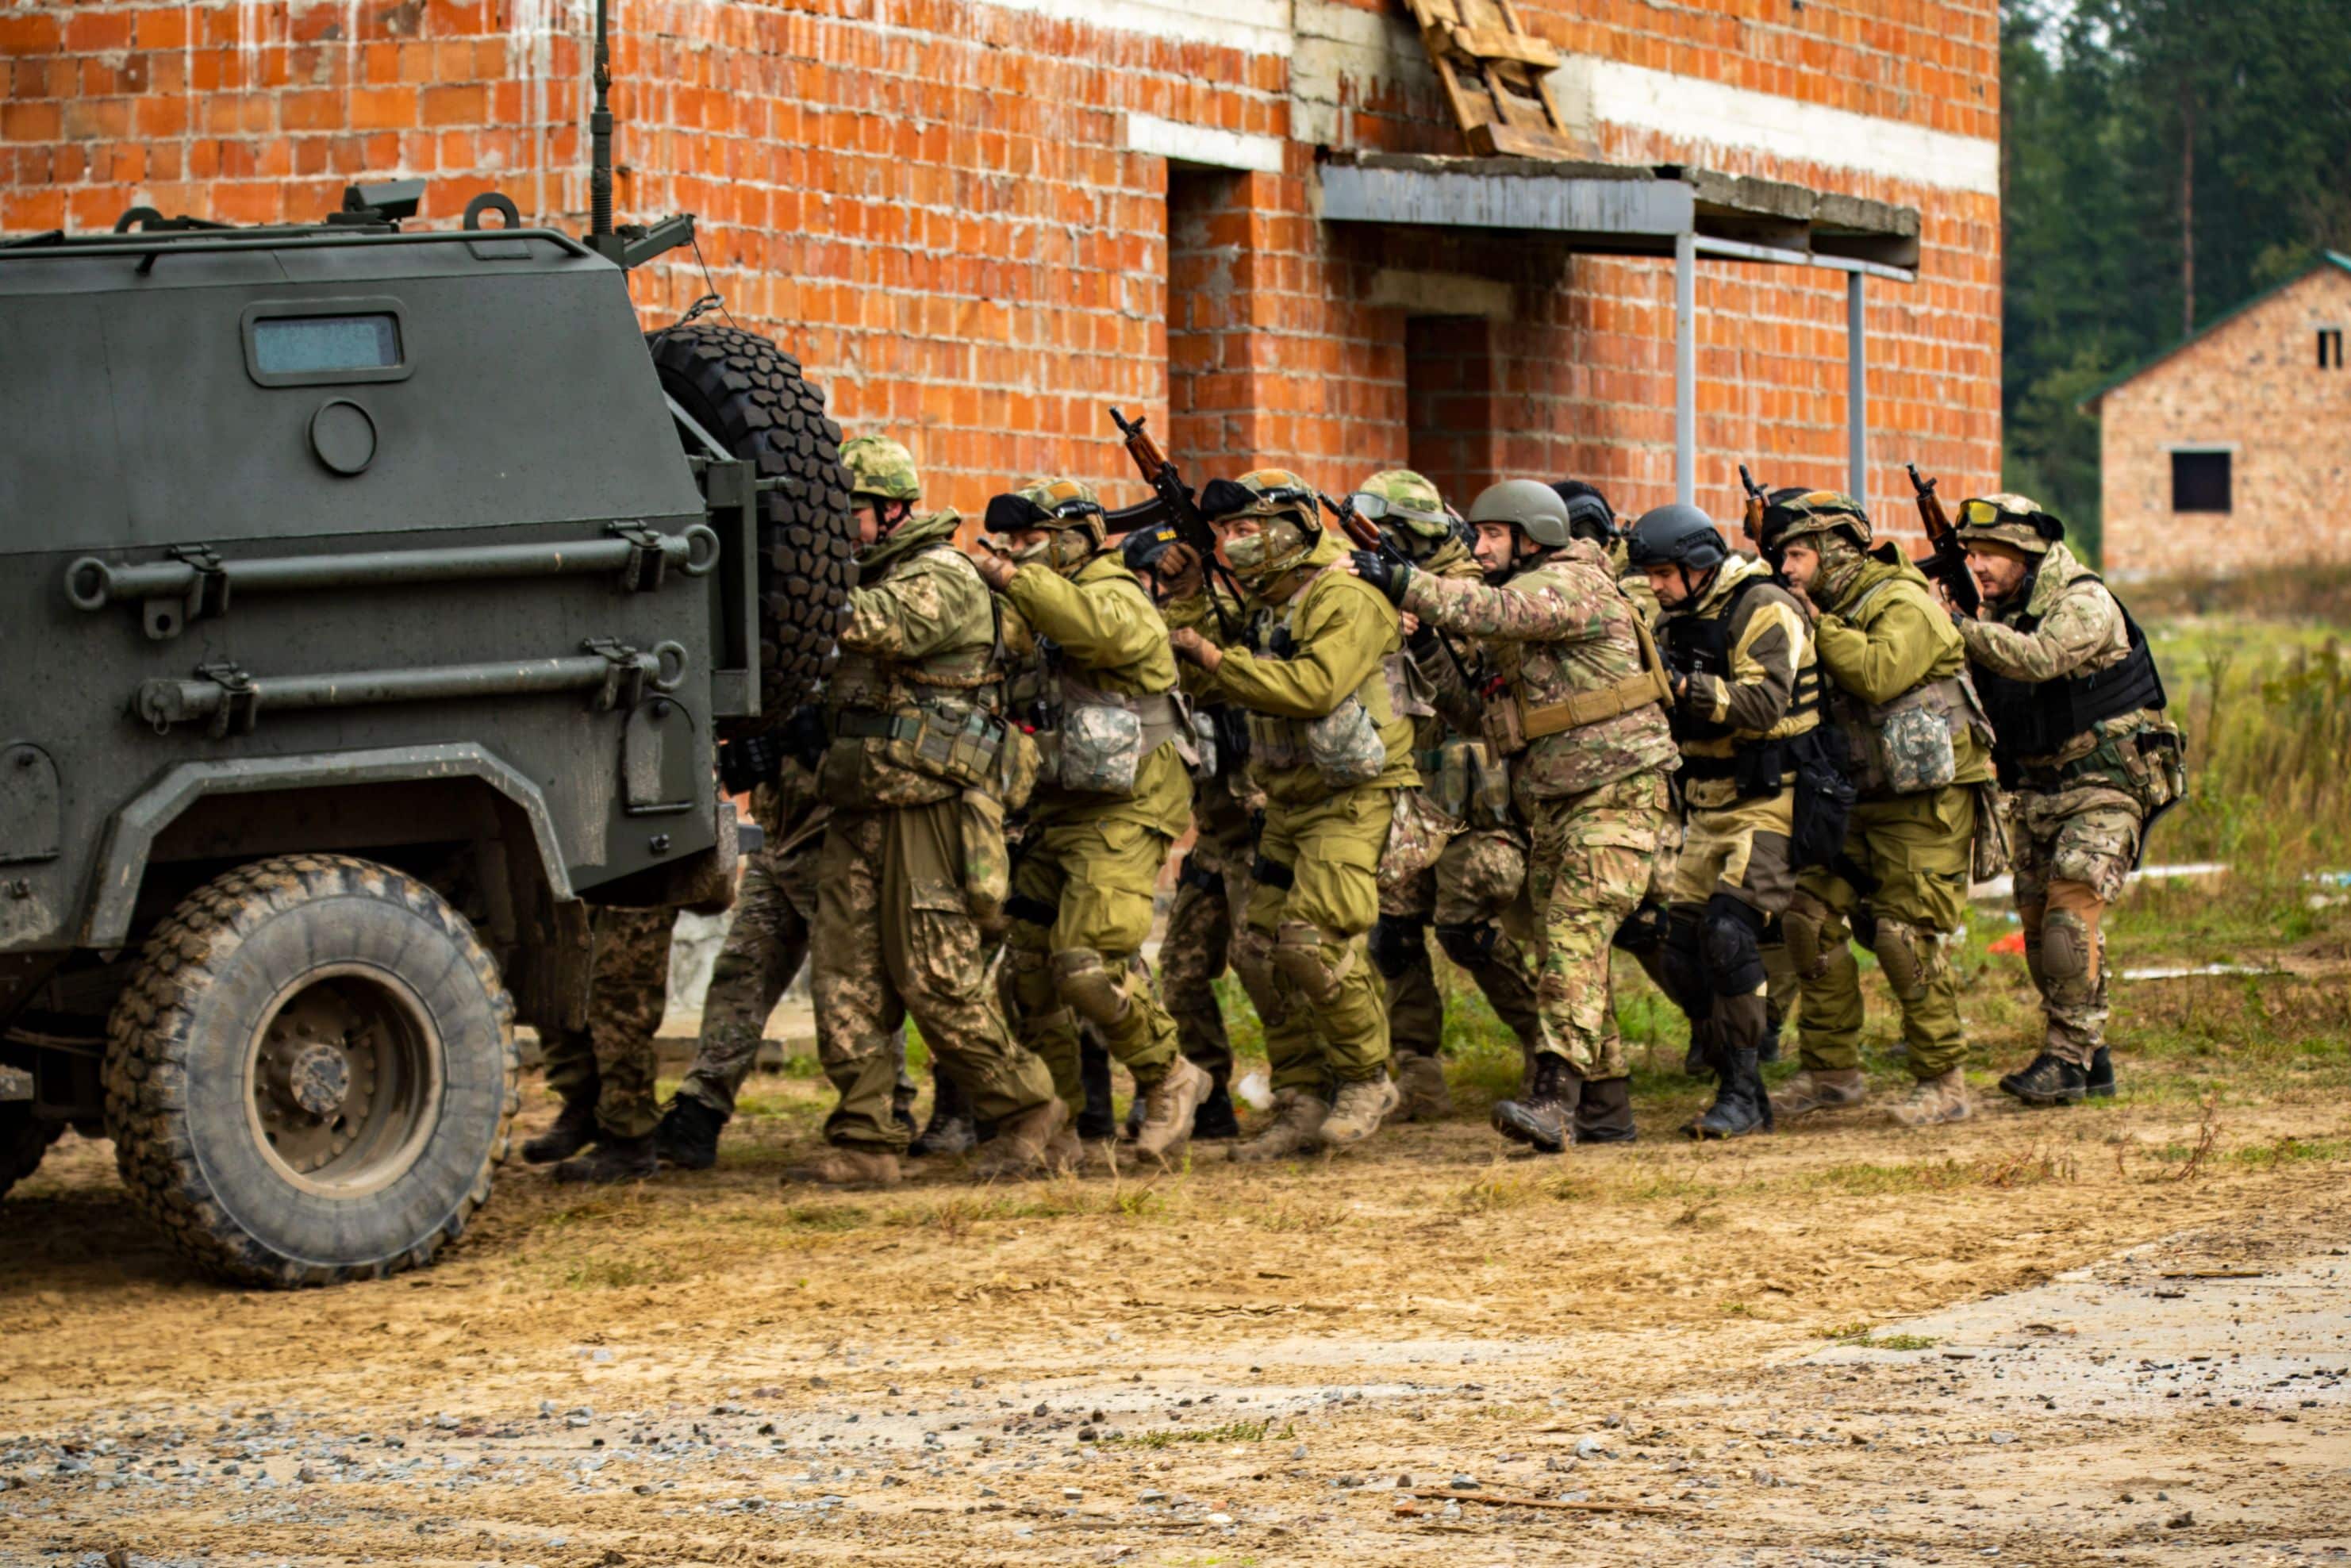 Ukrainian soldiers conduct urban operations, during Rapid Trident 2021. Soldiers from 15 nations participate in the exercise. Americans observe as Ukrainian, Polish, and Lithuanian soldiers conduct urban operations against Ukrainian OPFOR.